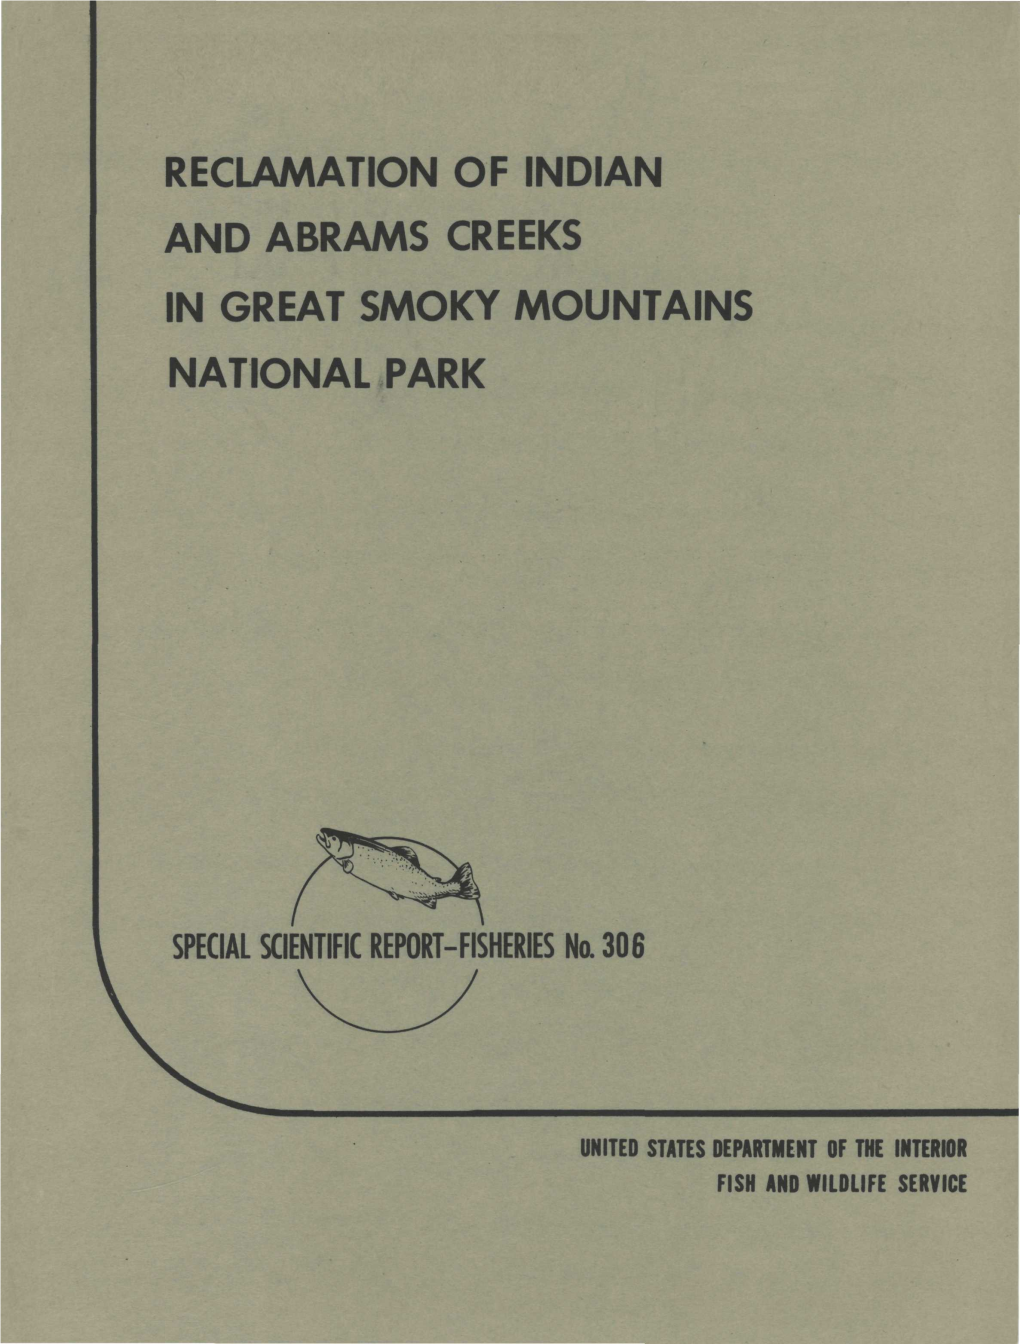 Reclamation of Indian and Abrams Creeks in Great Smoky Mountains National Park